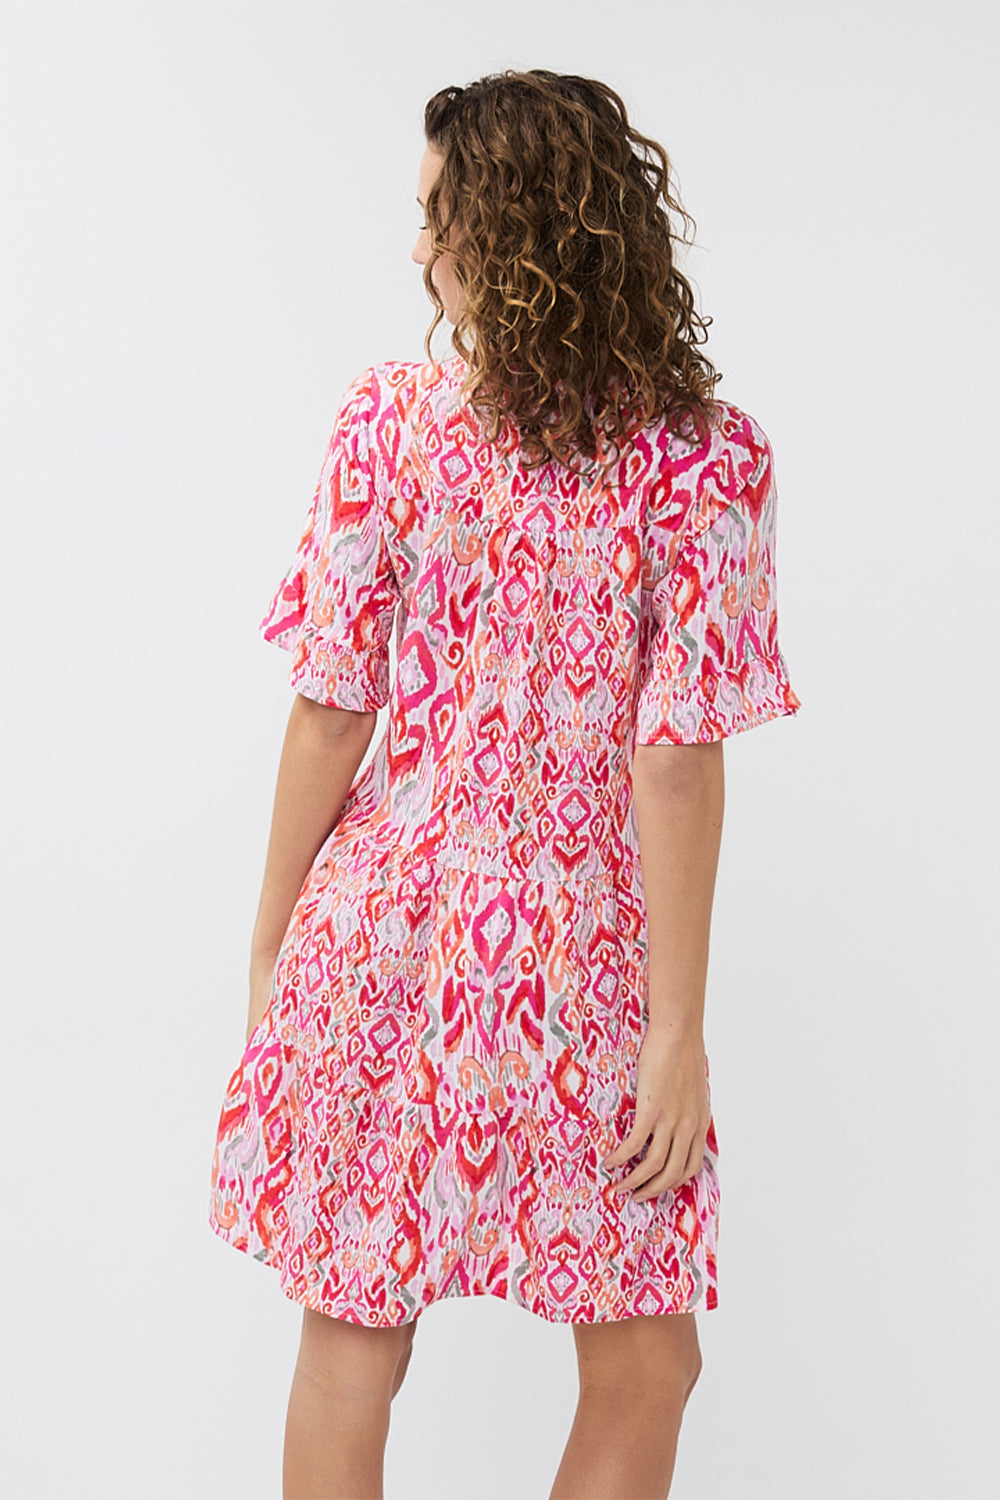 Back view of EsQualo (HS2415214) Short Sleeve Pink Ikat Printed Seersucker Dress with tiered mini skirt, split v-neck and a relaxed fit 